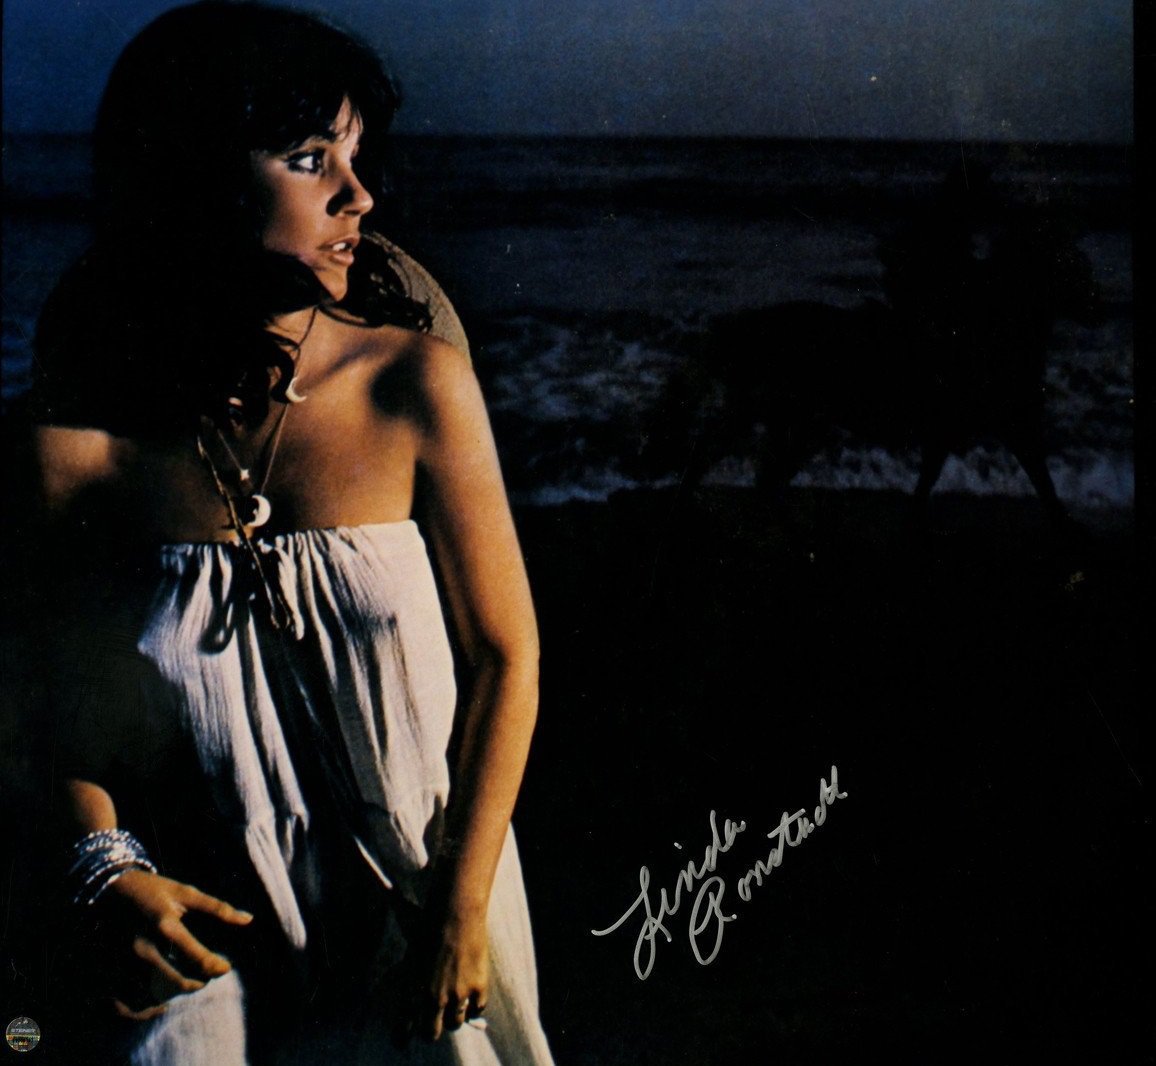 LINDA RONSTADT Autographed signed 8x10 Photo Picture REPRINT